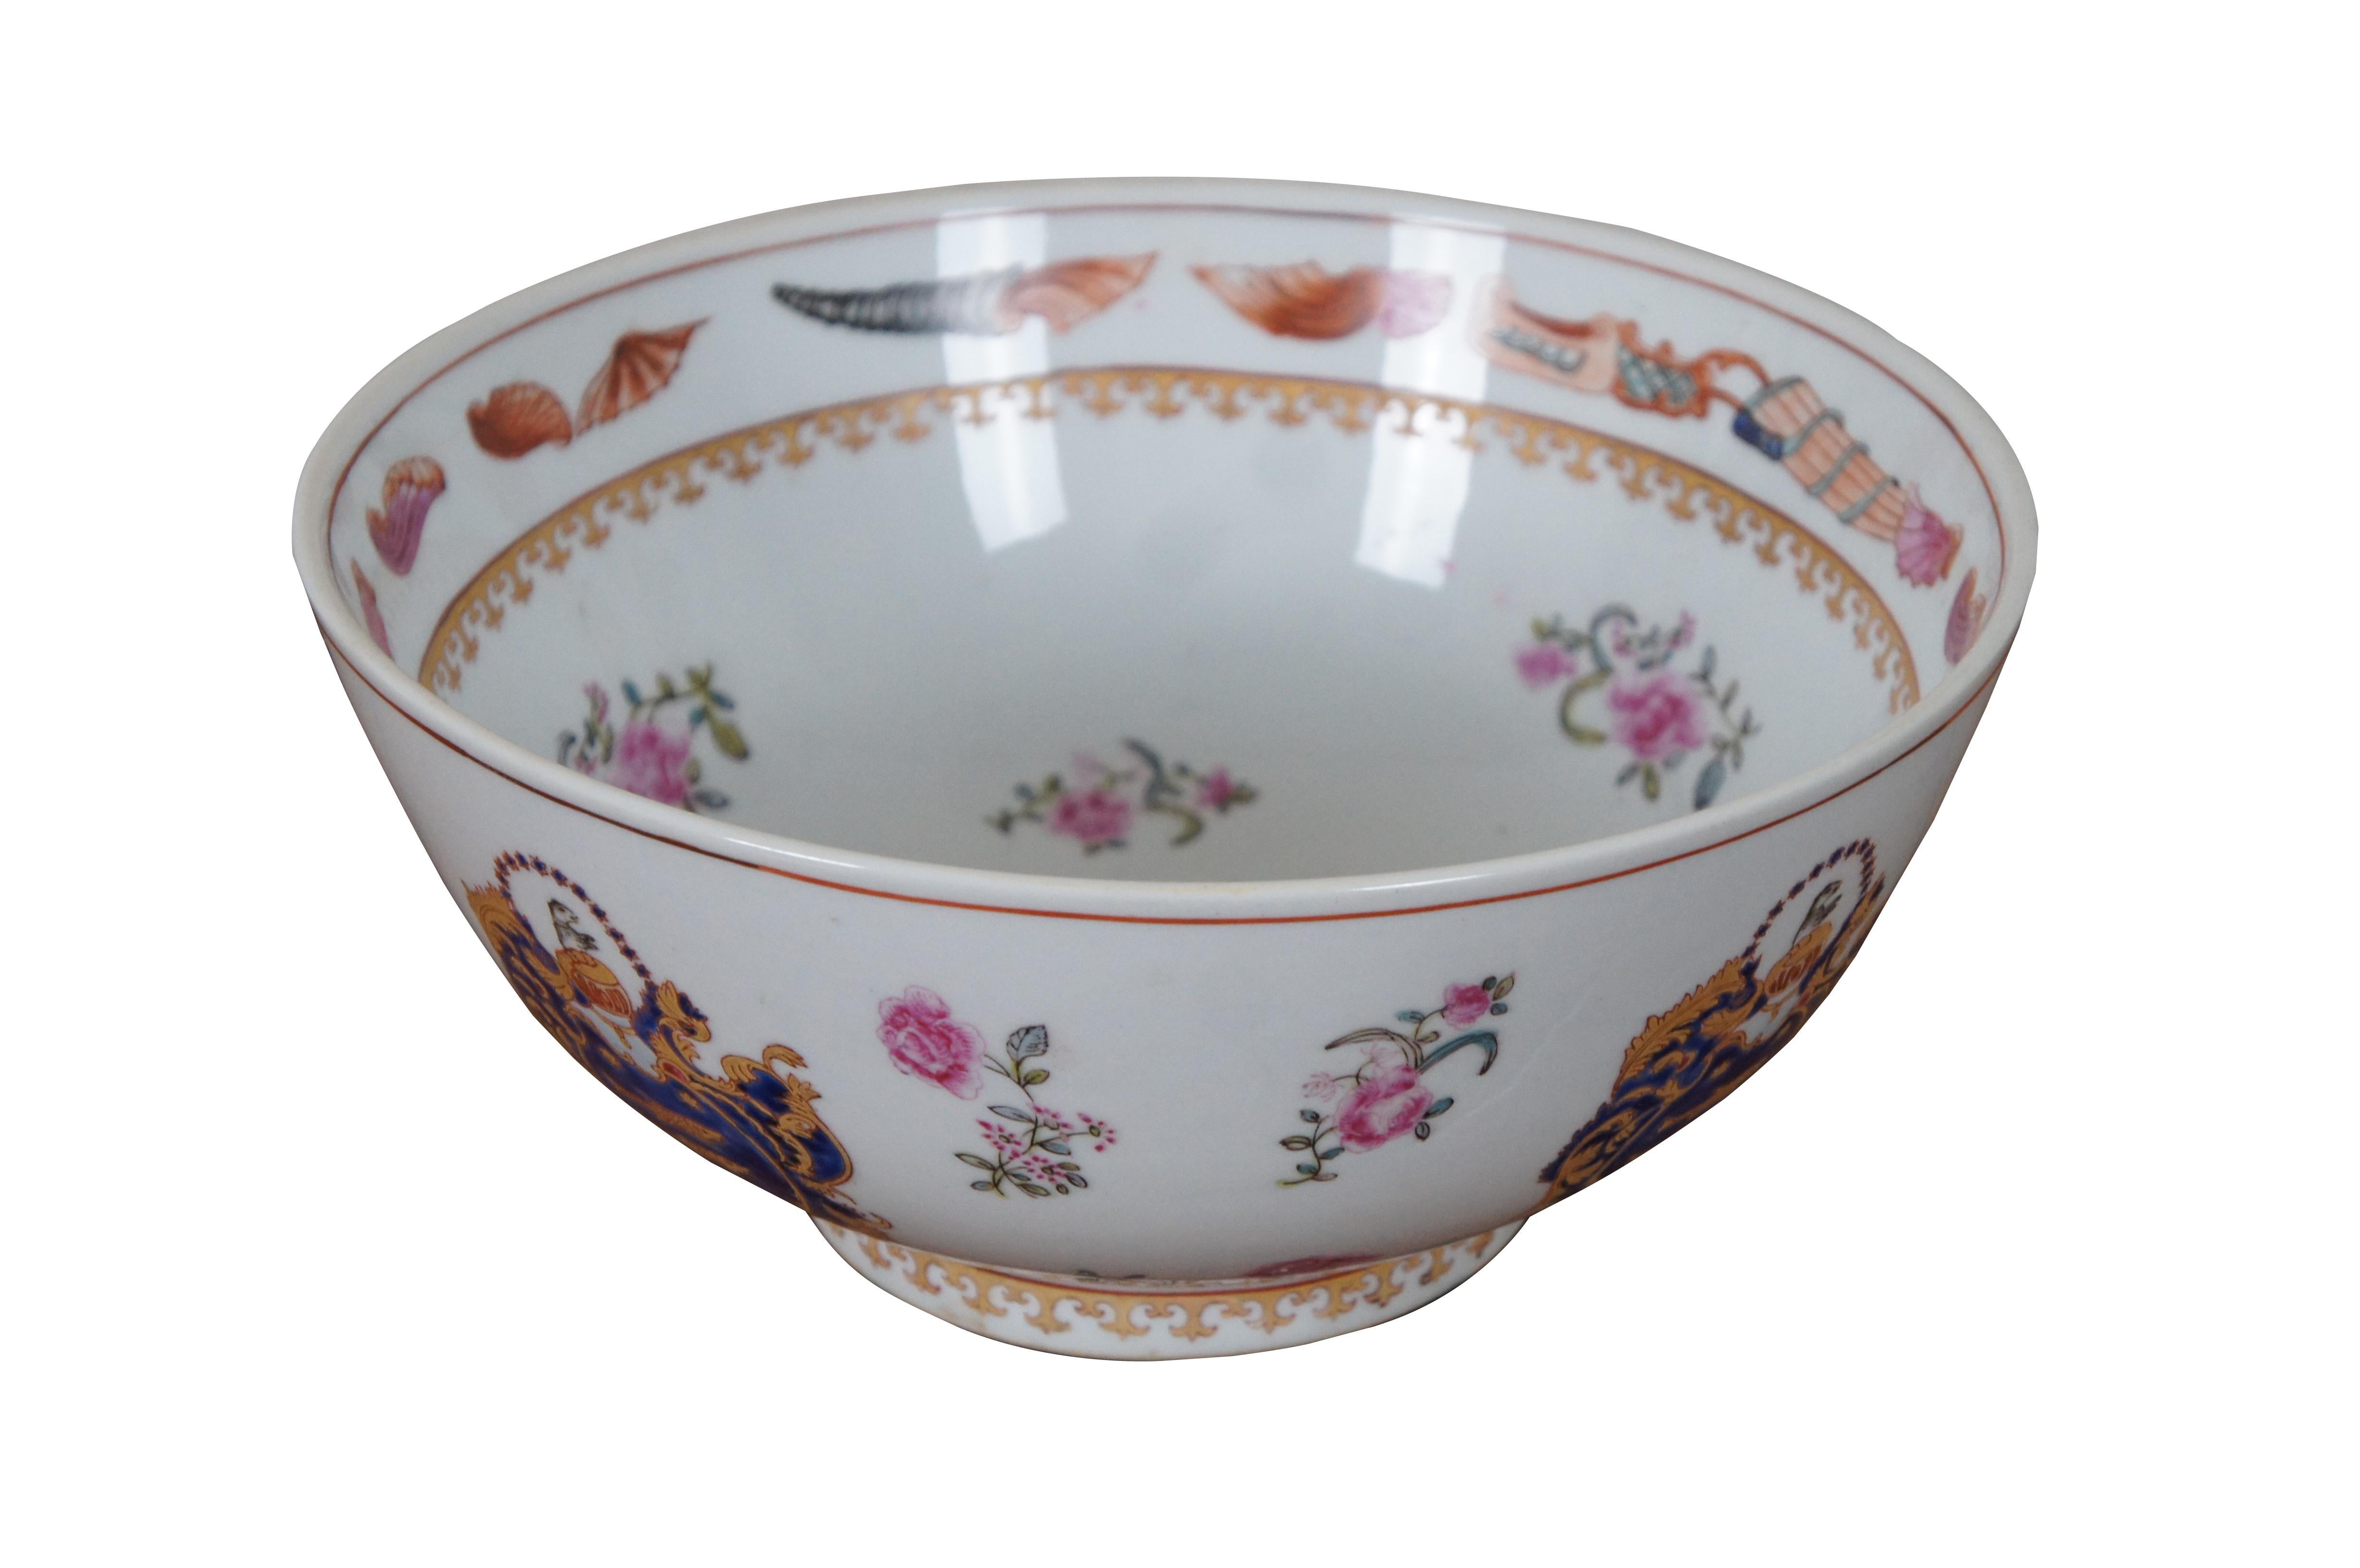 A large and impressive antique Chinese Export porcelain punch bowl featuring a gold and blue armorial coat of arms style crest with fish and dog figures, accented with pink roses, blue stars and an interior border of sea shells.

??????: Made in